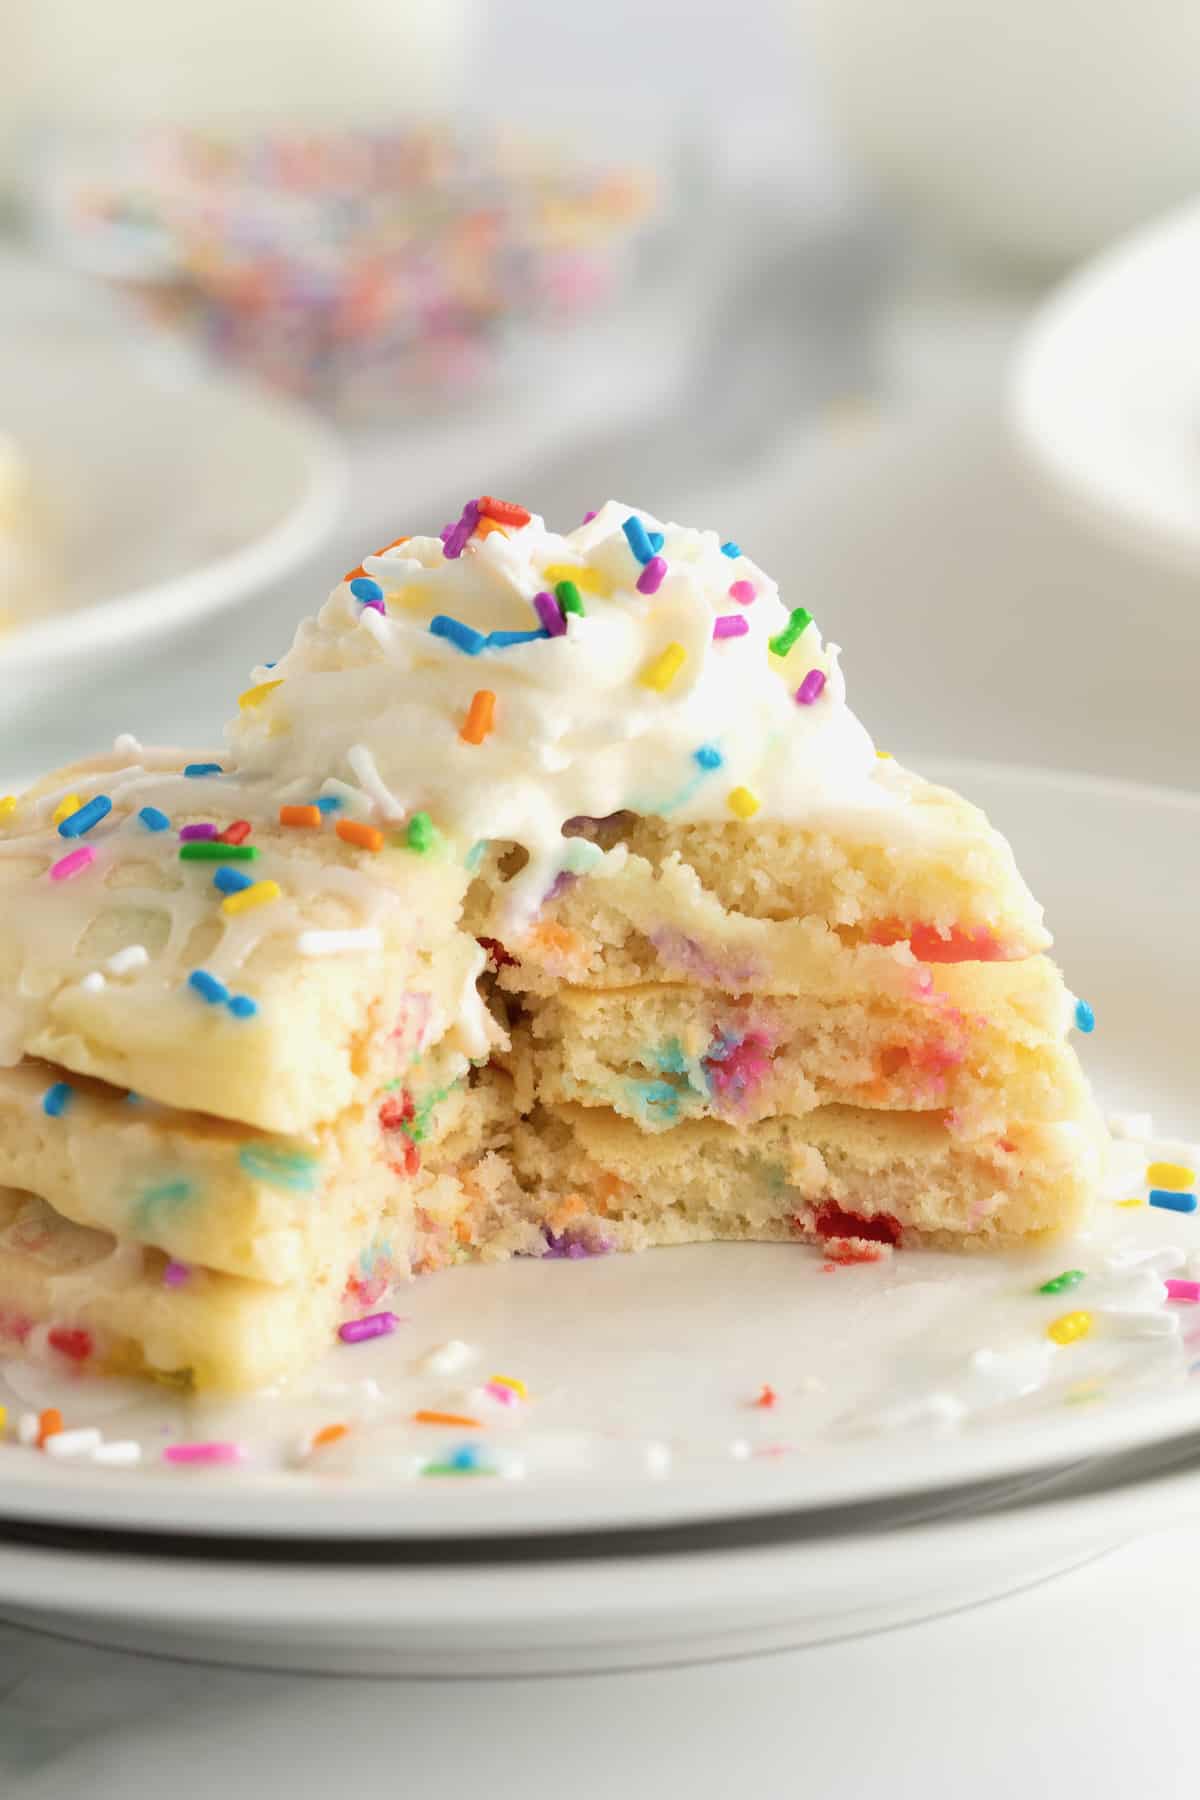 Fluffy pancakes with colorful confetti sprinkles, topped with whipped cream and more sprinkles.